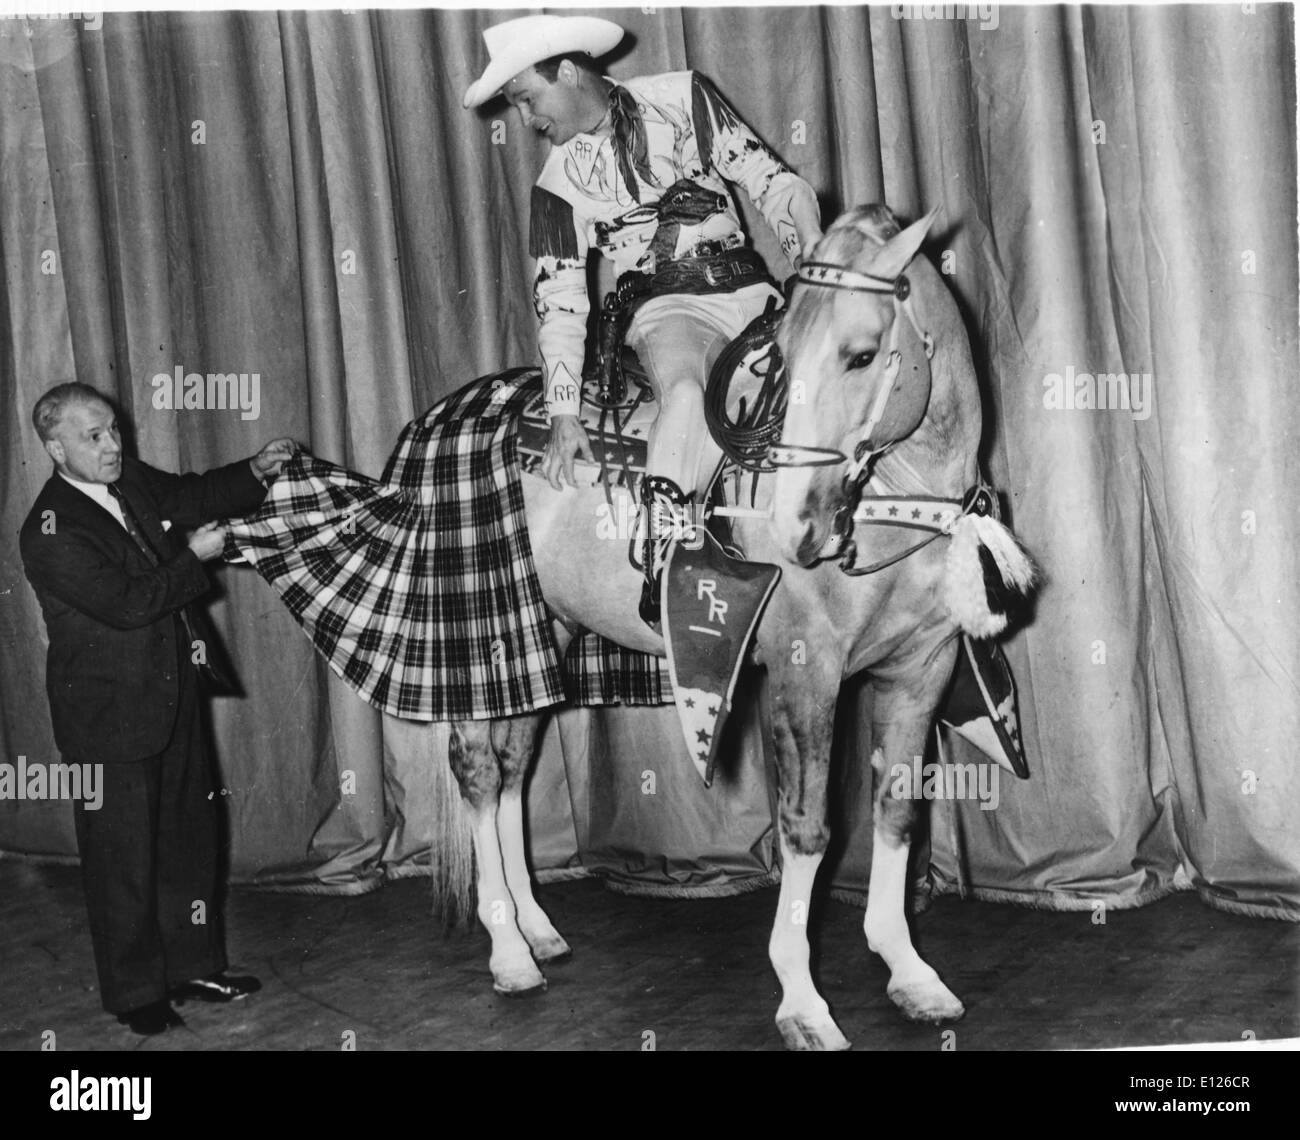 Jan 02, 2007; Los Angeles, CA, USA; LEONARD FRANKLIN SLYE aka ROY ROGERS (November 5, 1911 Ð July 6, 1998), who became famous as Roy Rogers, was a singer and cowboy actor. He and his third wife Dale Evans, his golden palomino TRIGGER, and his German shepherd Bullet were featured in over one hundred movies and The Roy Rogers Show which ran on radio for nine years before moving to television from 1951 through 1964. His productions usually featured two sidekicks, Pat Brady (who drove a jeep called 'Nellybelle') and the crotchety bushwhacker Gabby Hayes. Roy's nickname was 'King of the Cowboys' Stock Photo